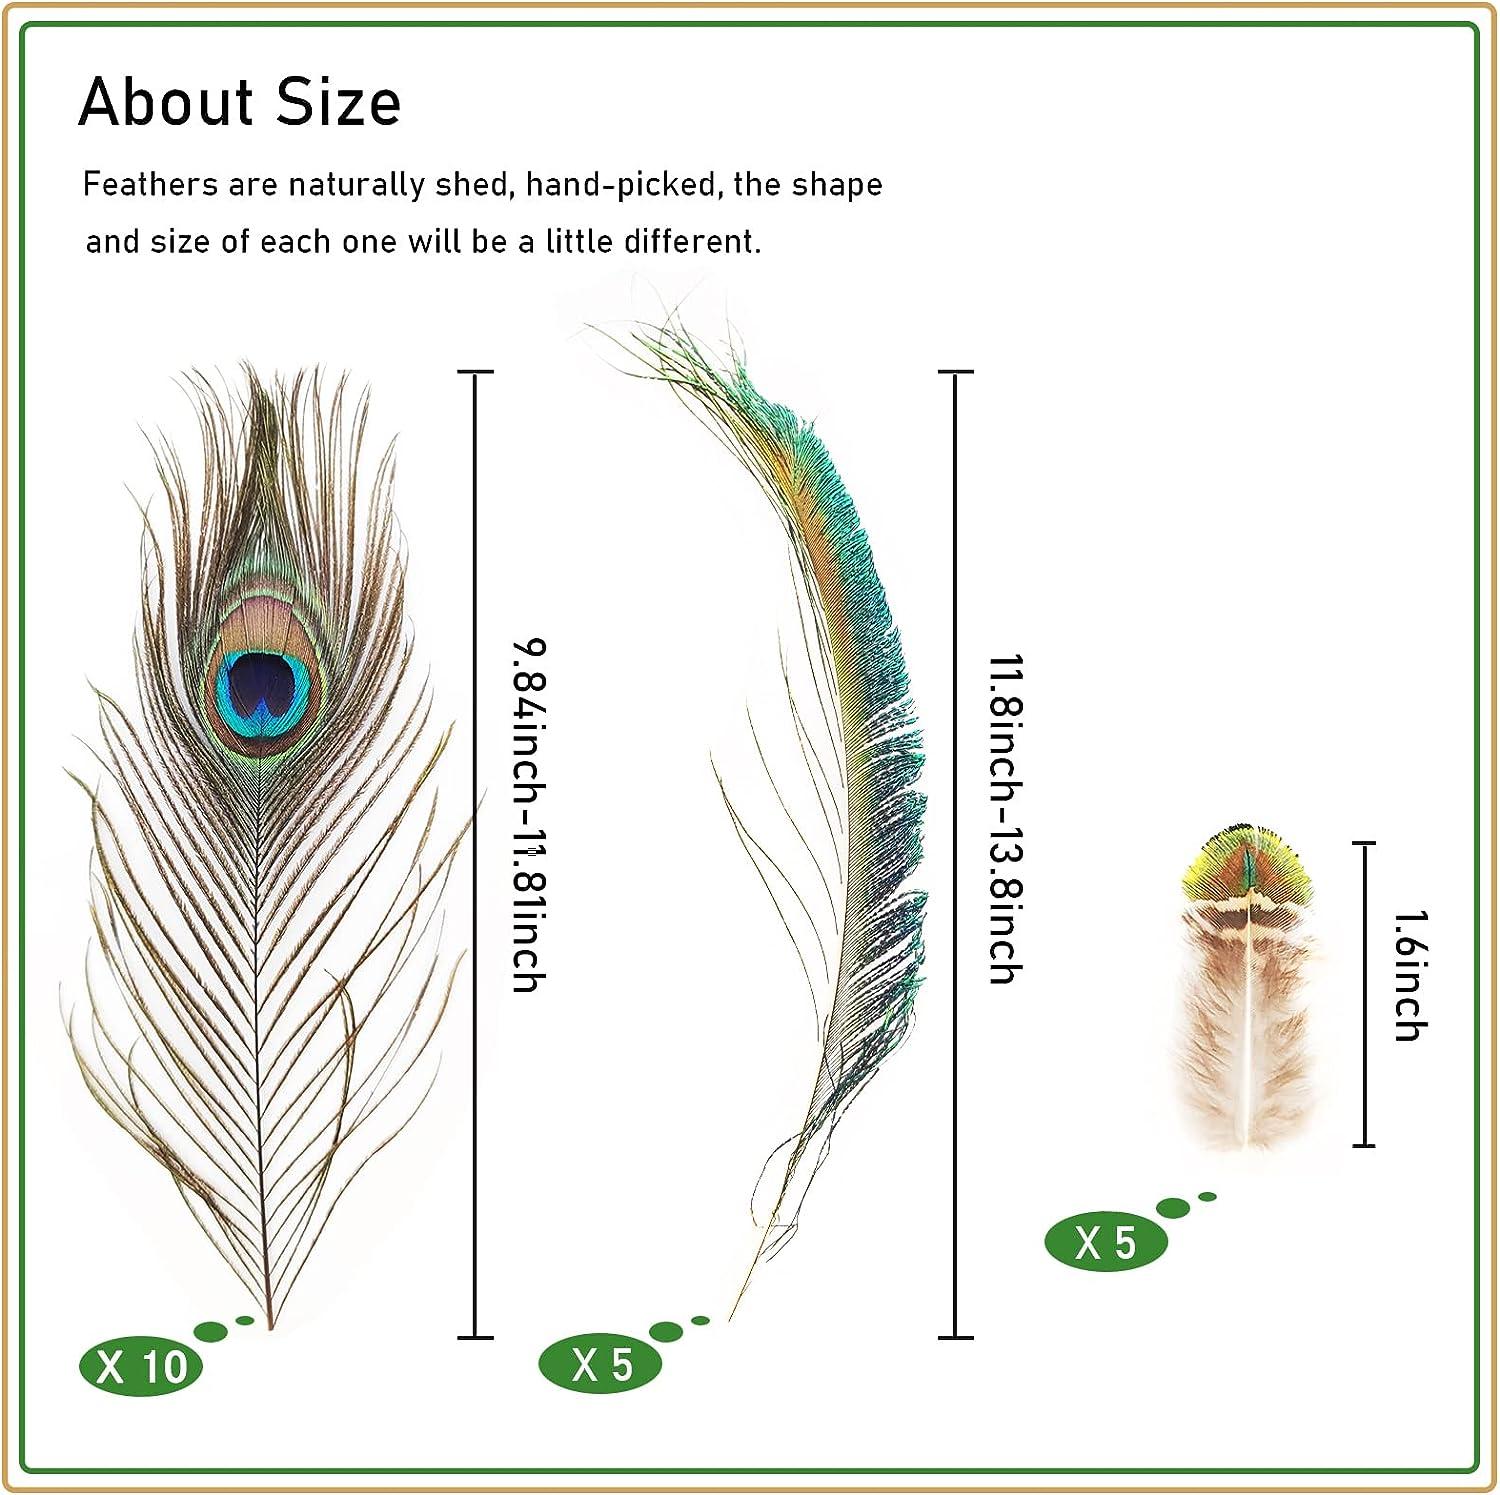 one real peacock feather